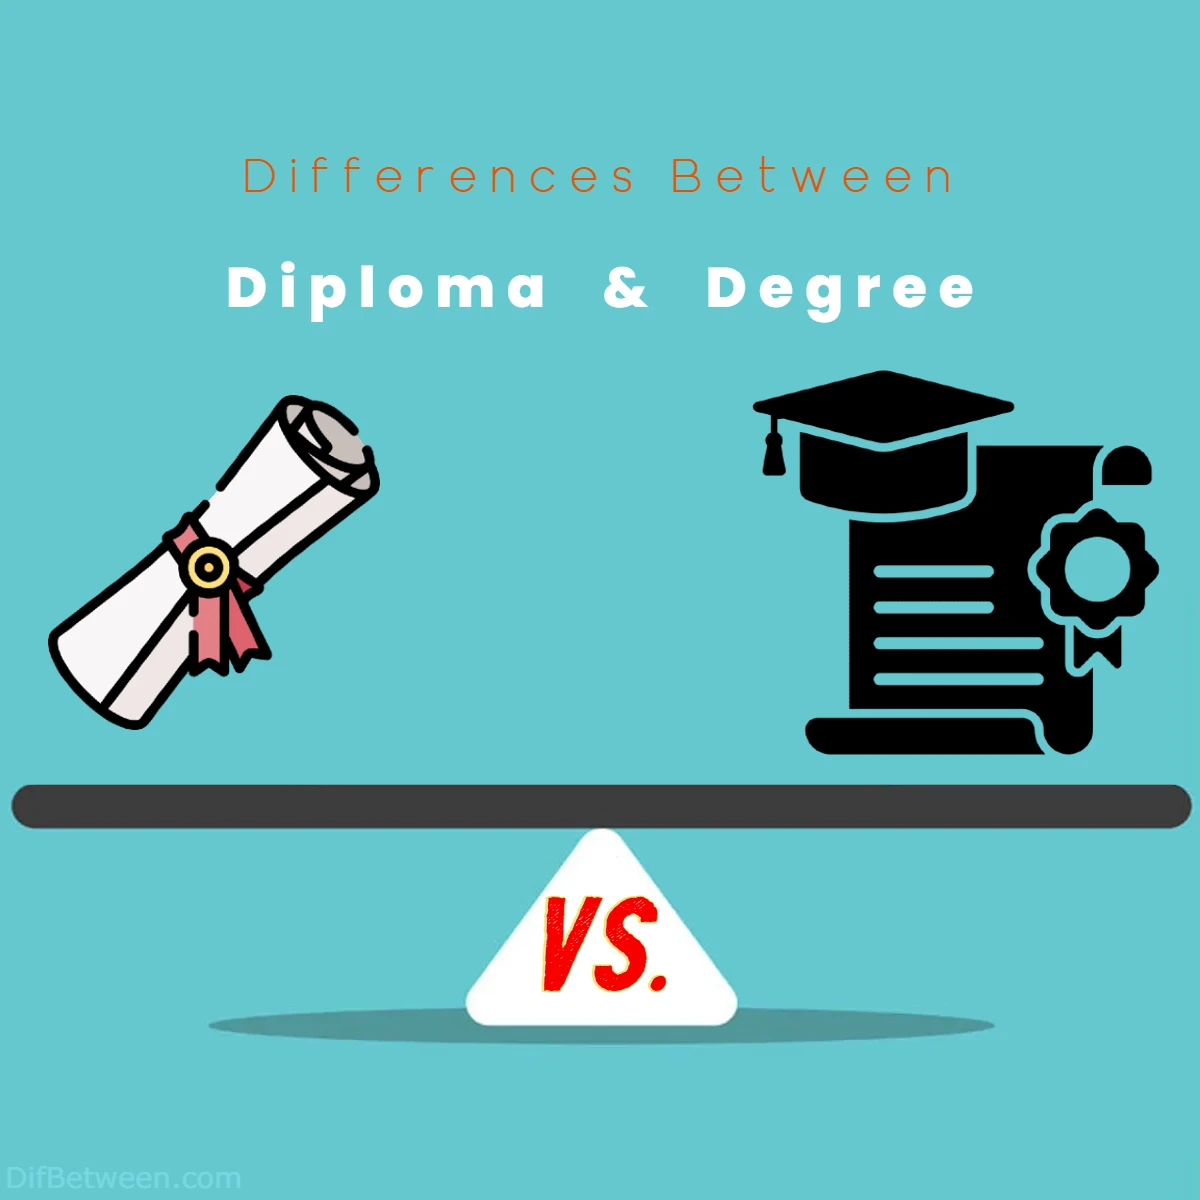 Differences Between Diploma vs Degree